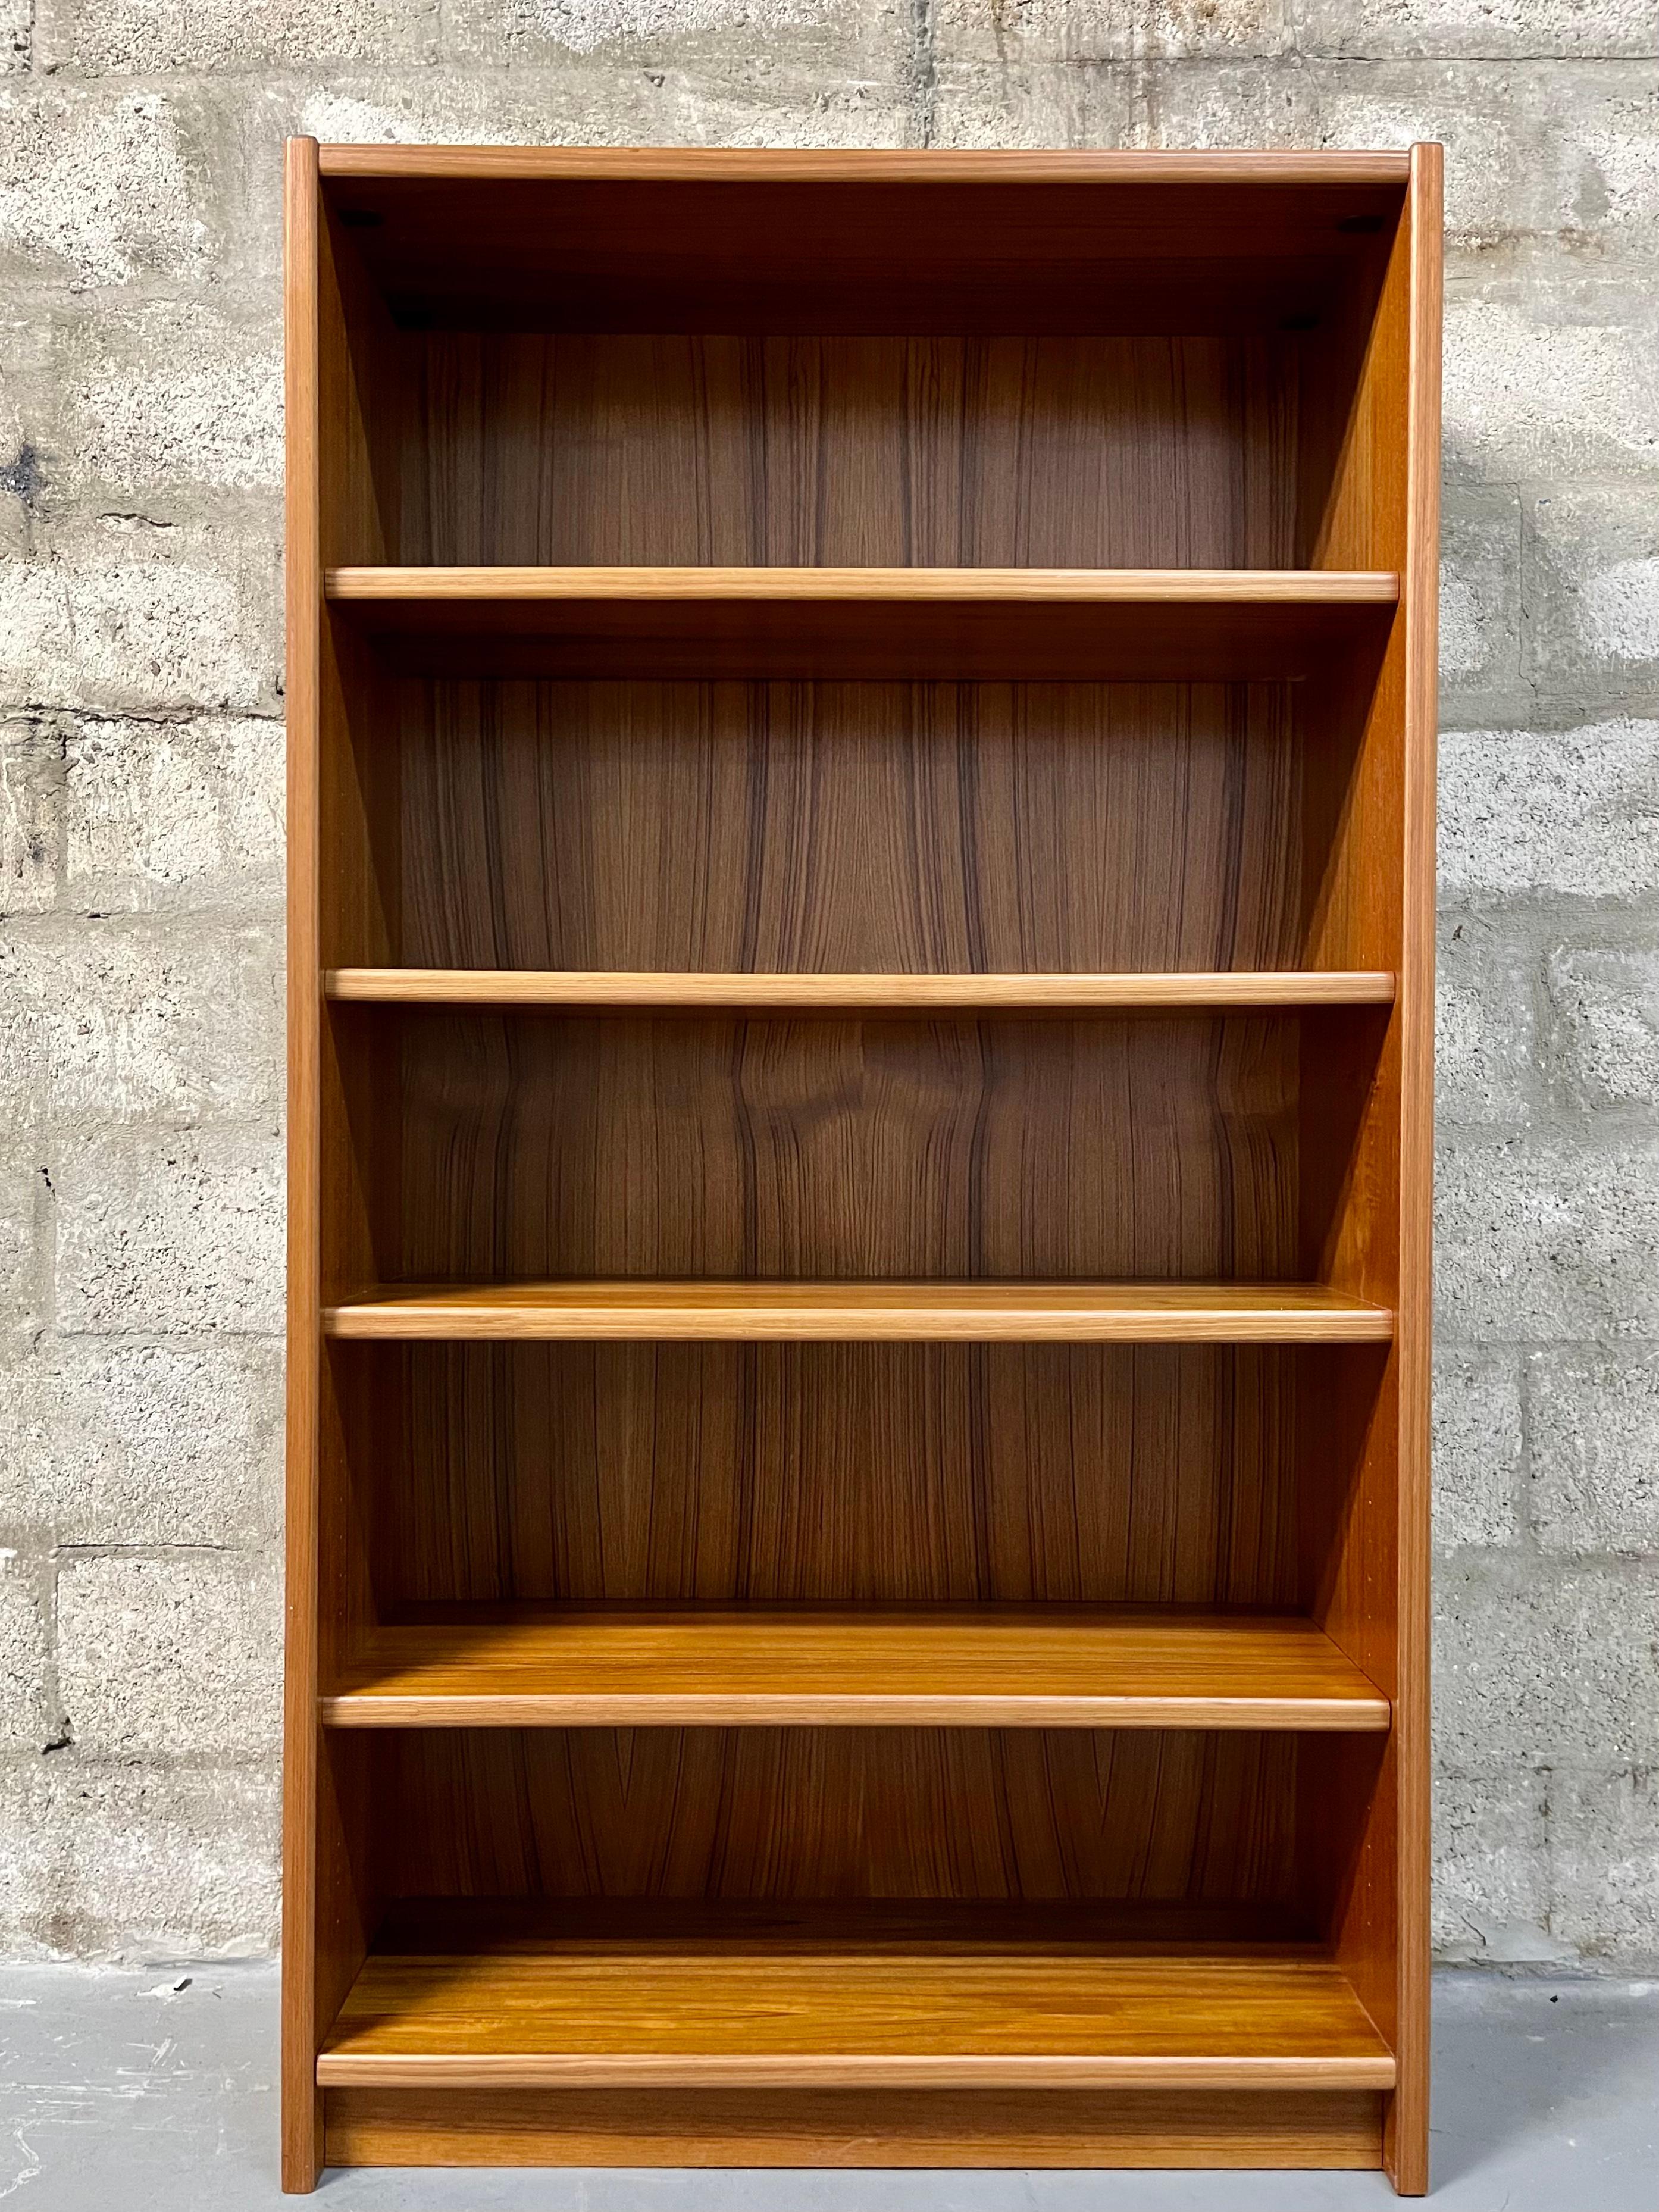 Vintage Mid Century Modern Danish Bookcase. C 1970s
Features a modern Scandinavian minimalist design with a beautiful teak wood grain. Offers plenty of storage space with three adjustable floating shelves edged with solid teak profiles. The